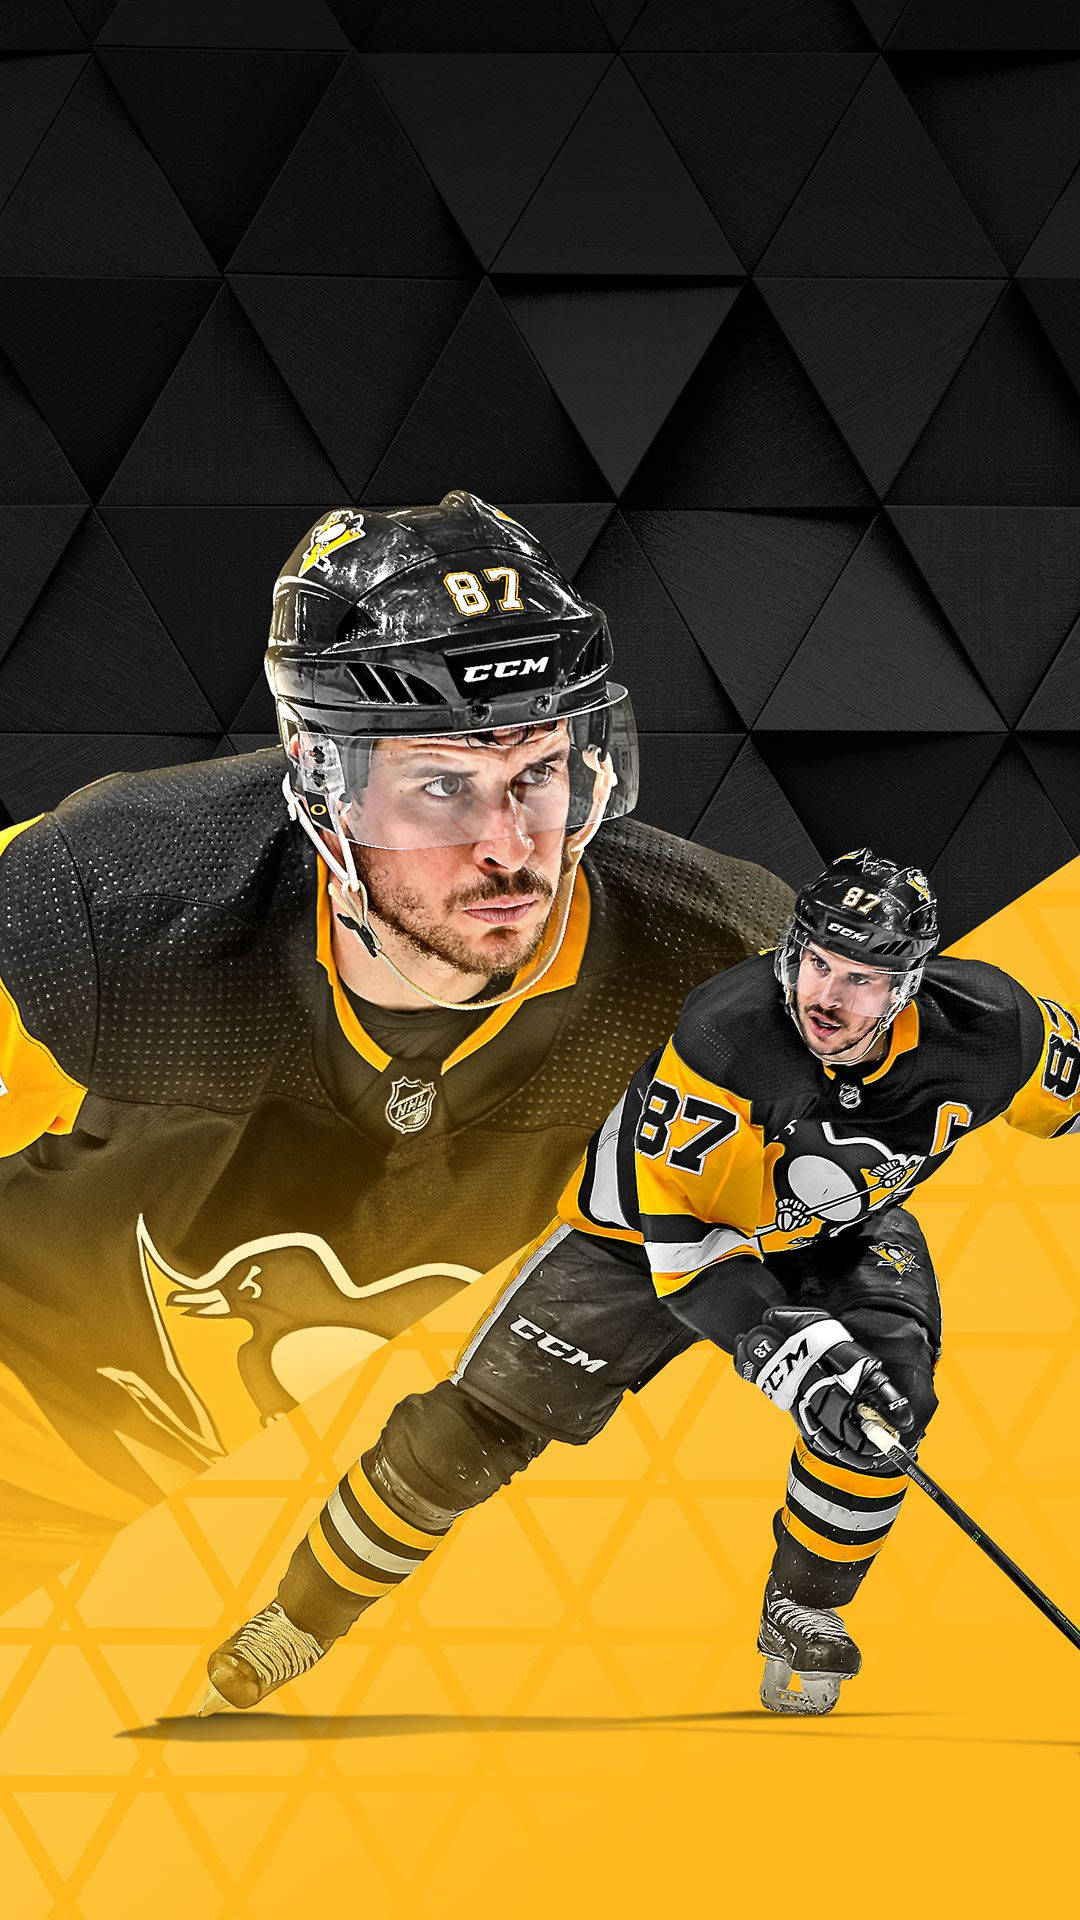 Download National Hockey League Player Sidney Crosby Wallpaper  Wallpapers com